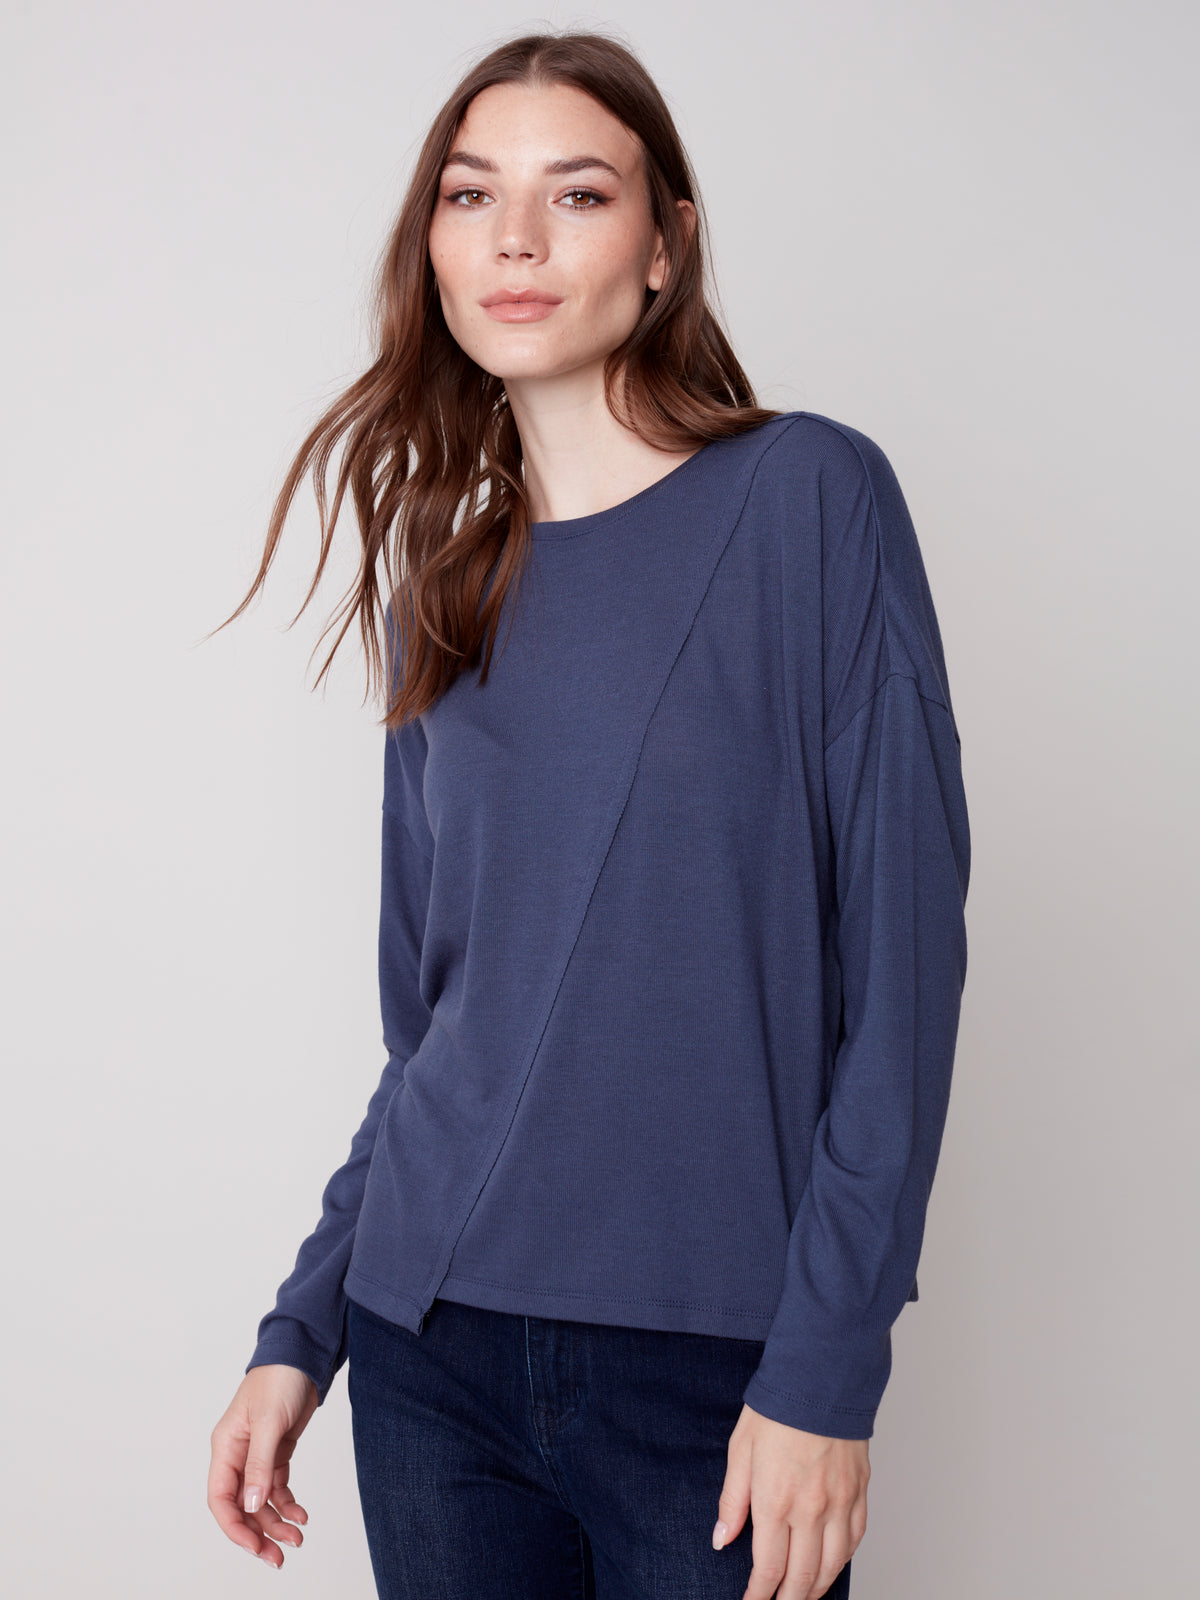 The Candace Top in Navy